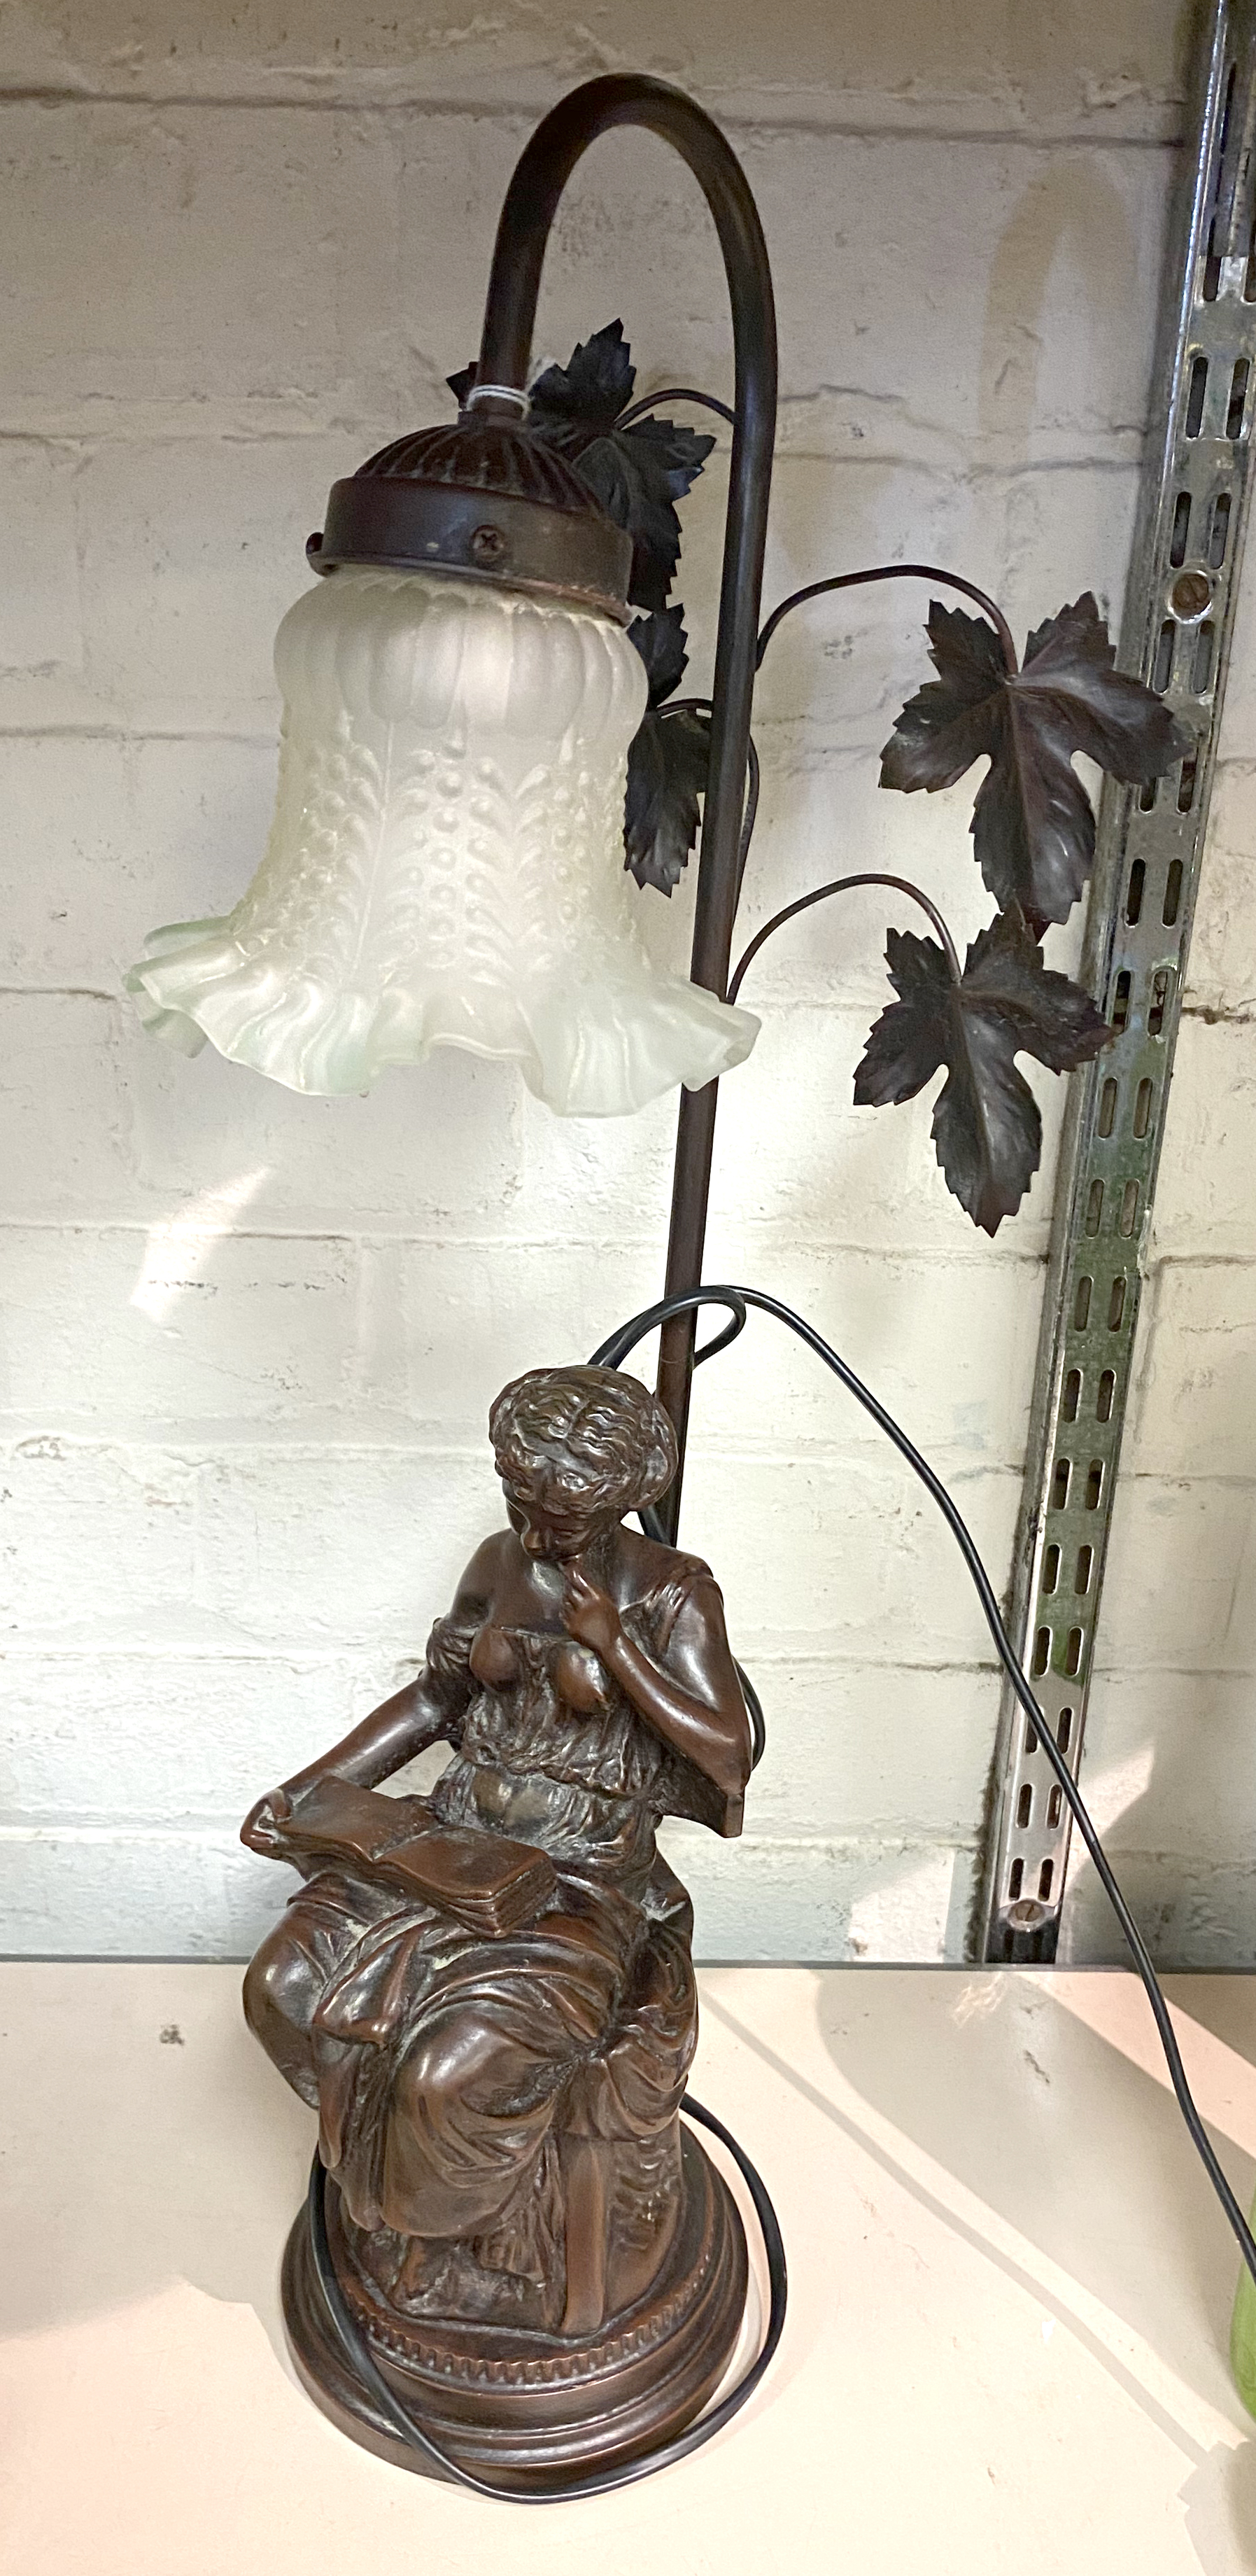 LADY FIGURE TABLE LAMP 56CMS (H) APPROX